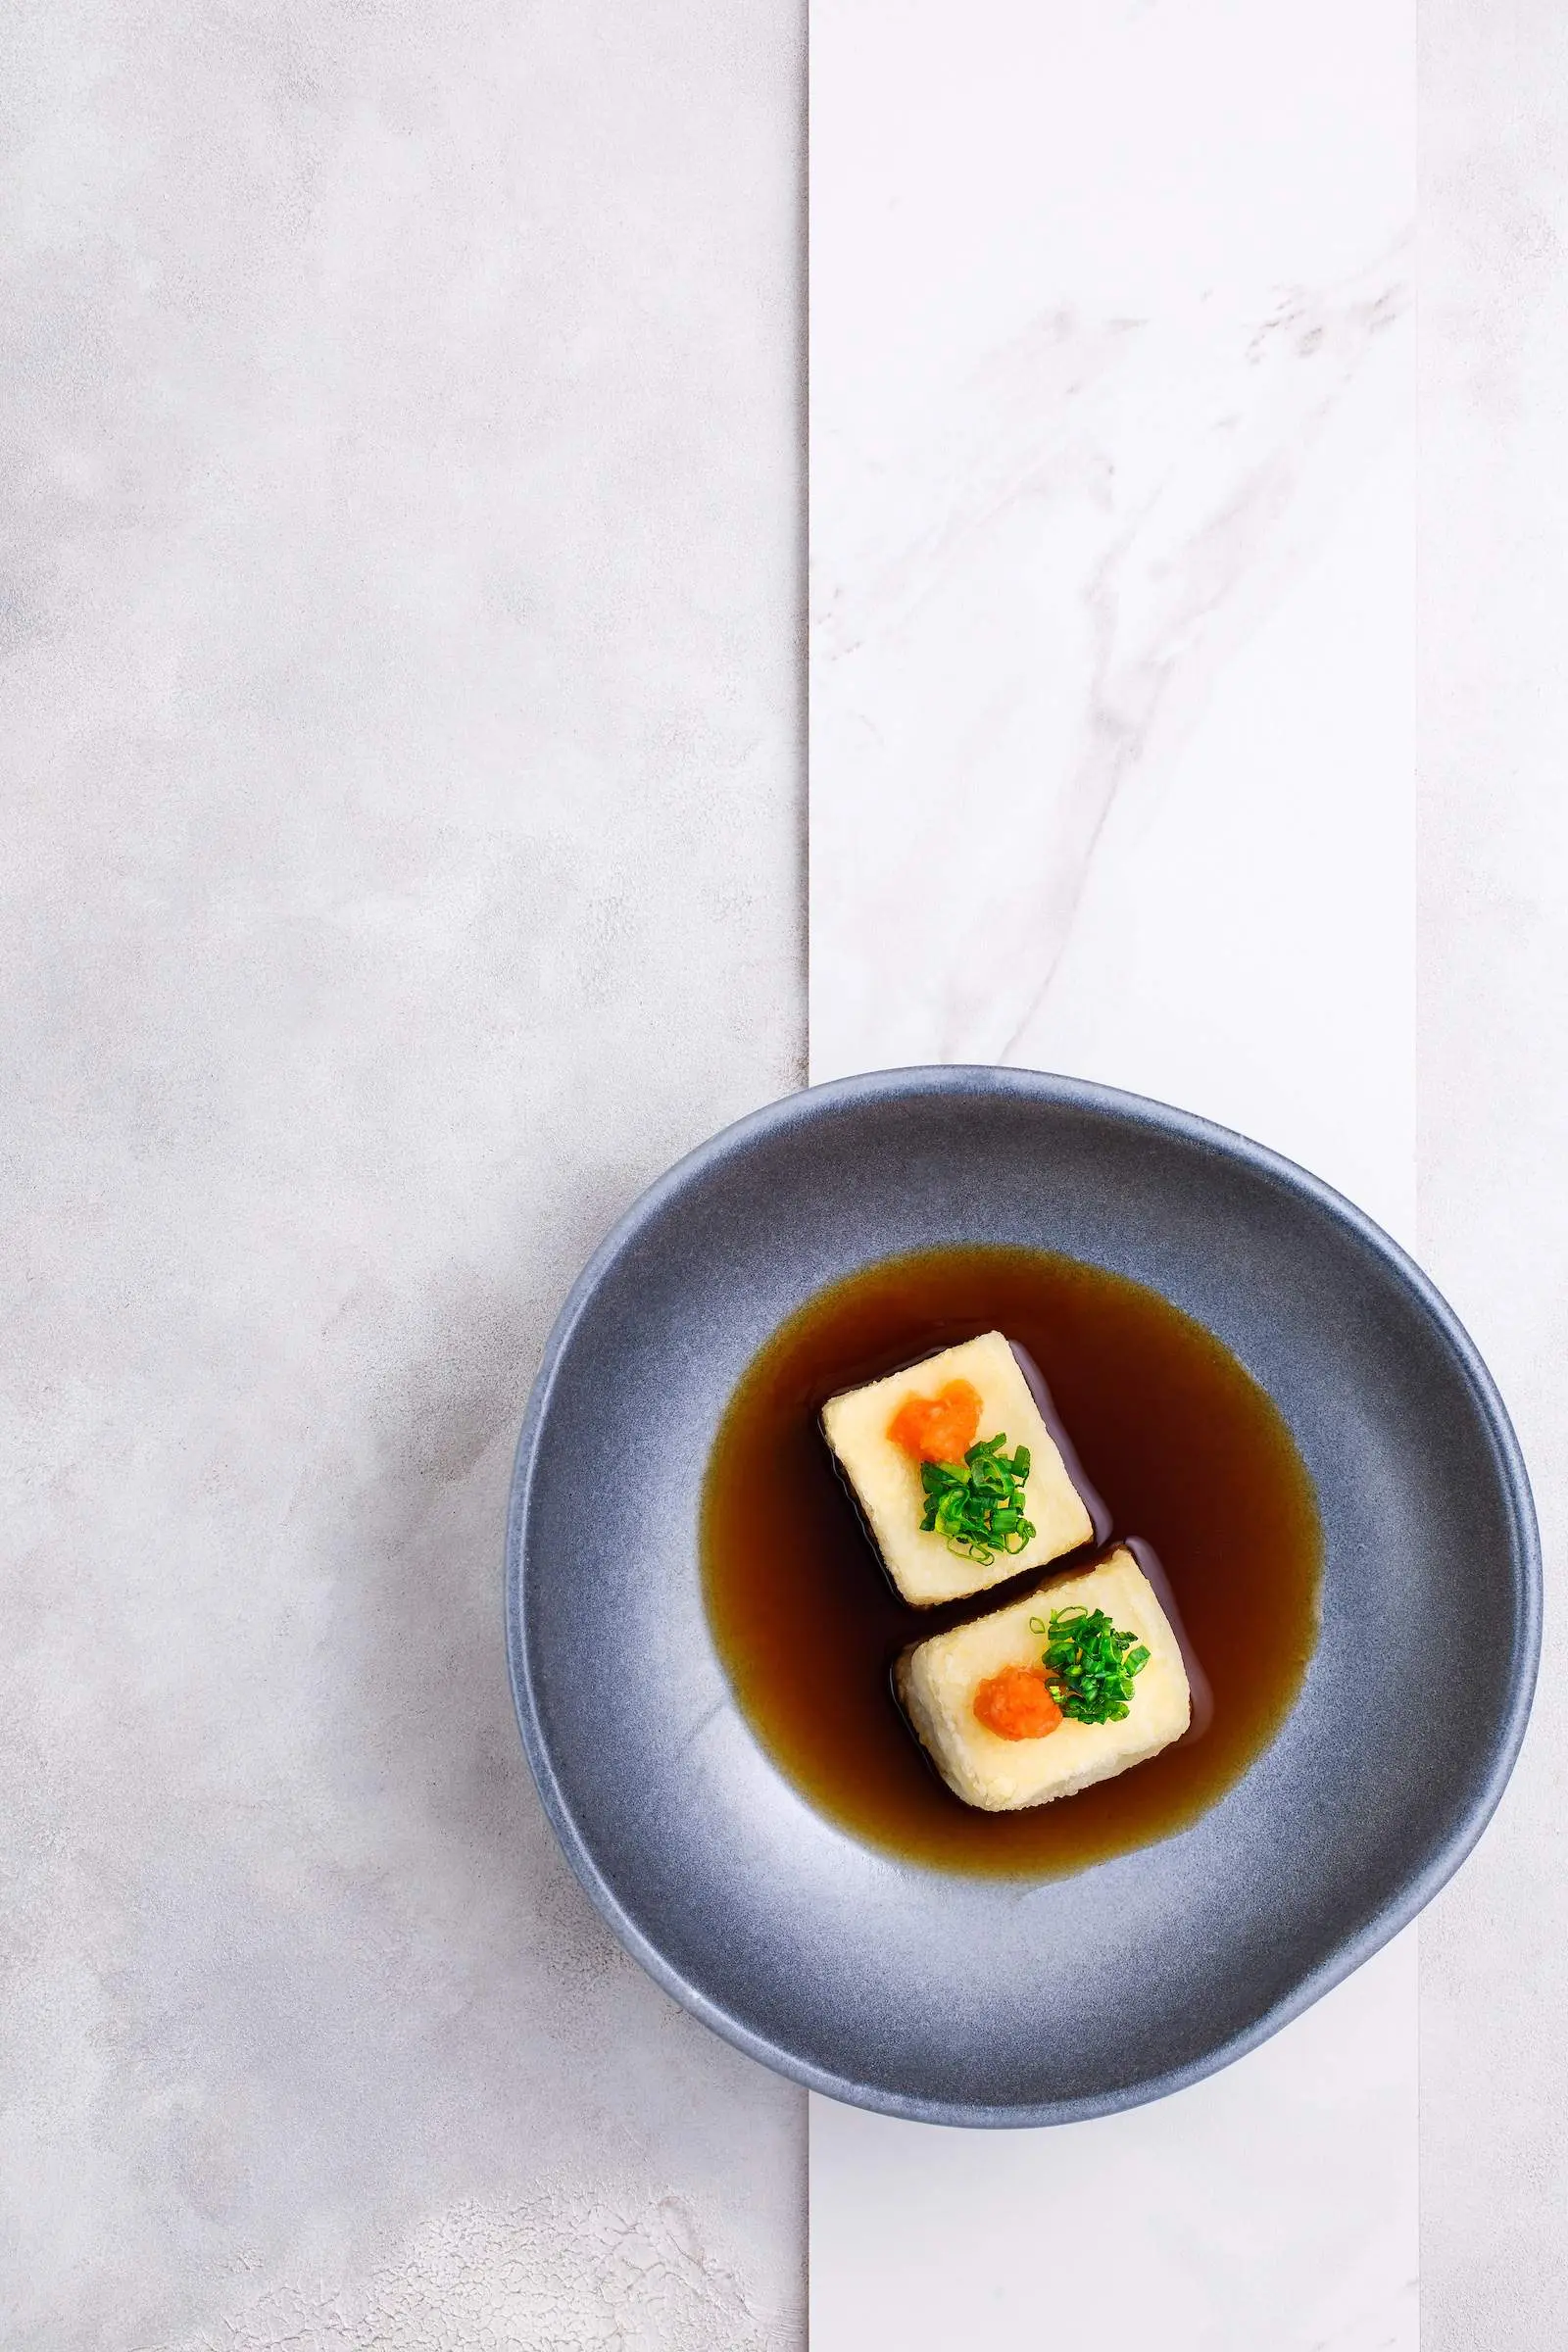 A bowl of tofu in a sauce on a marble table.